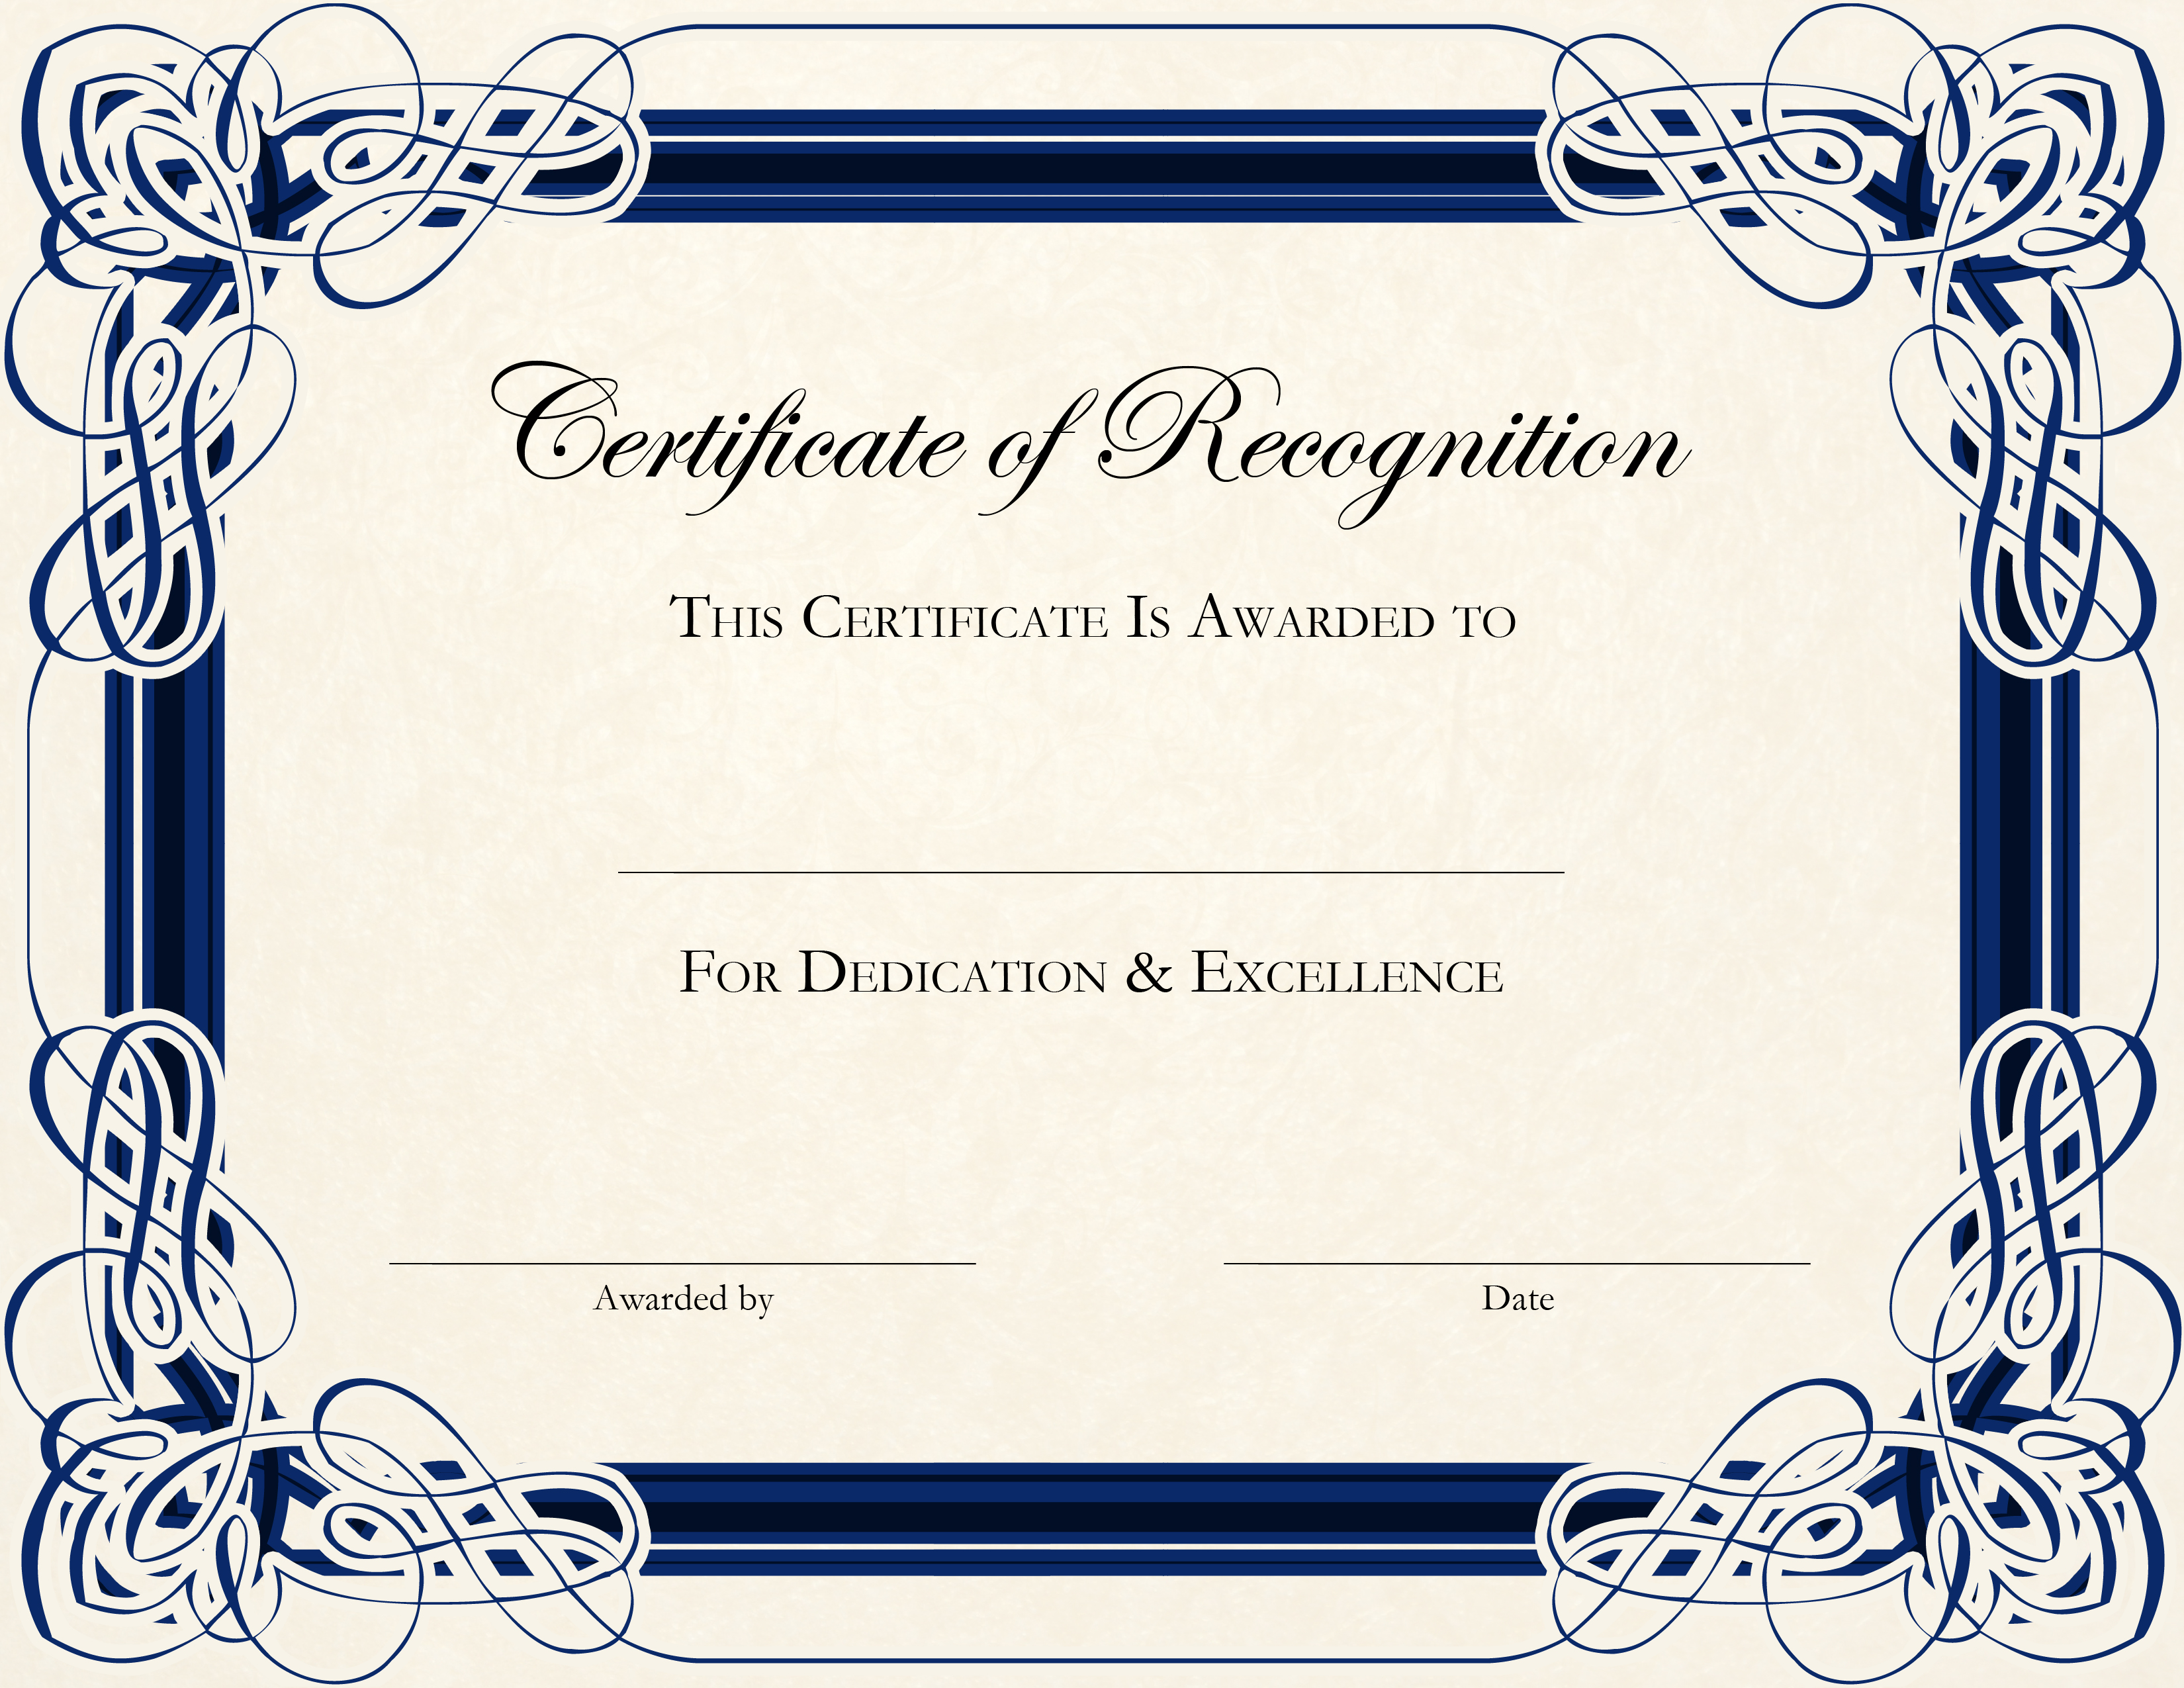 certificate-of-recognition-word-template